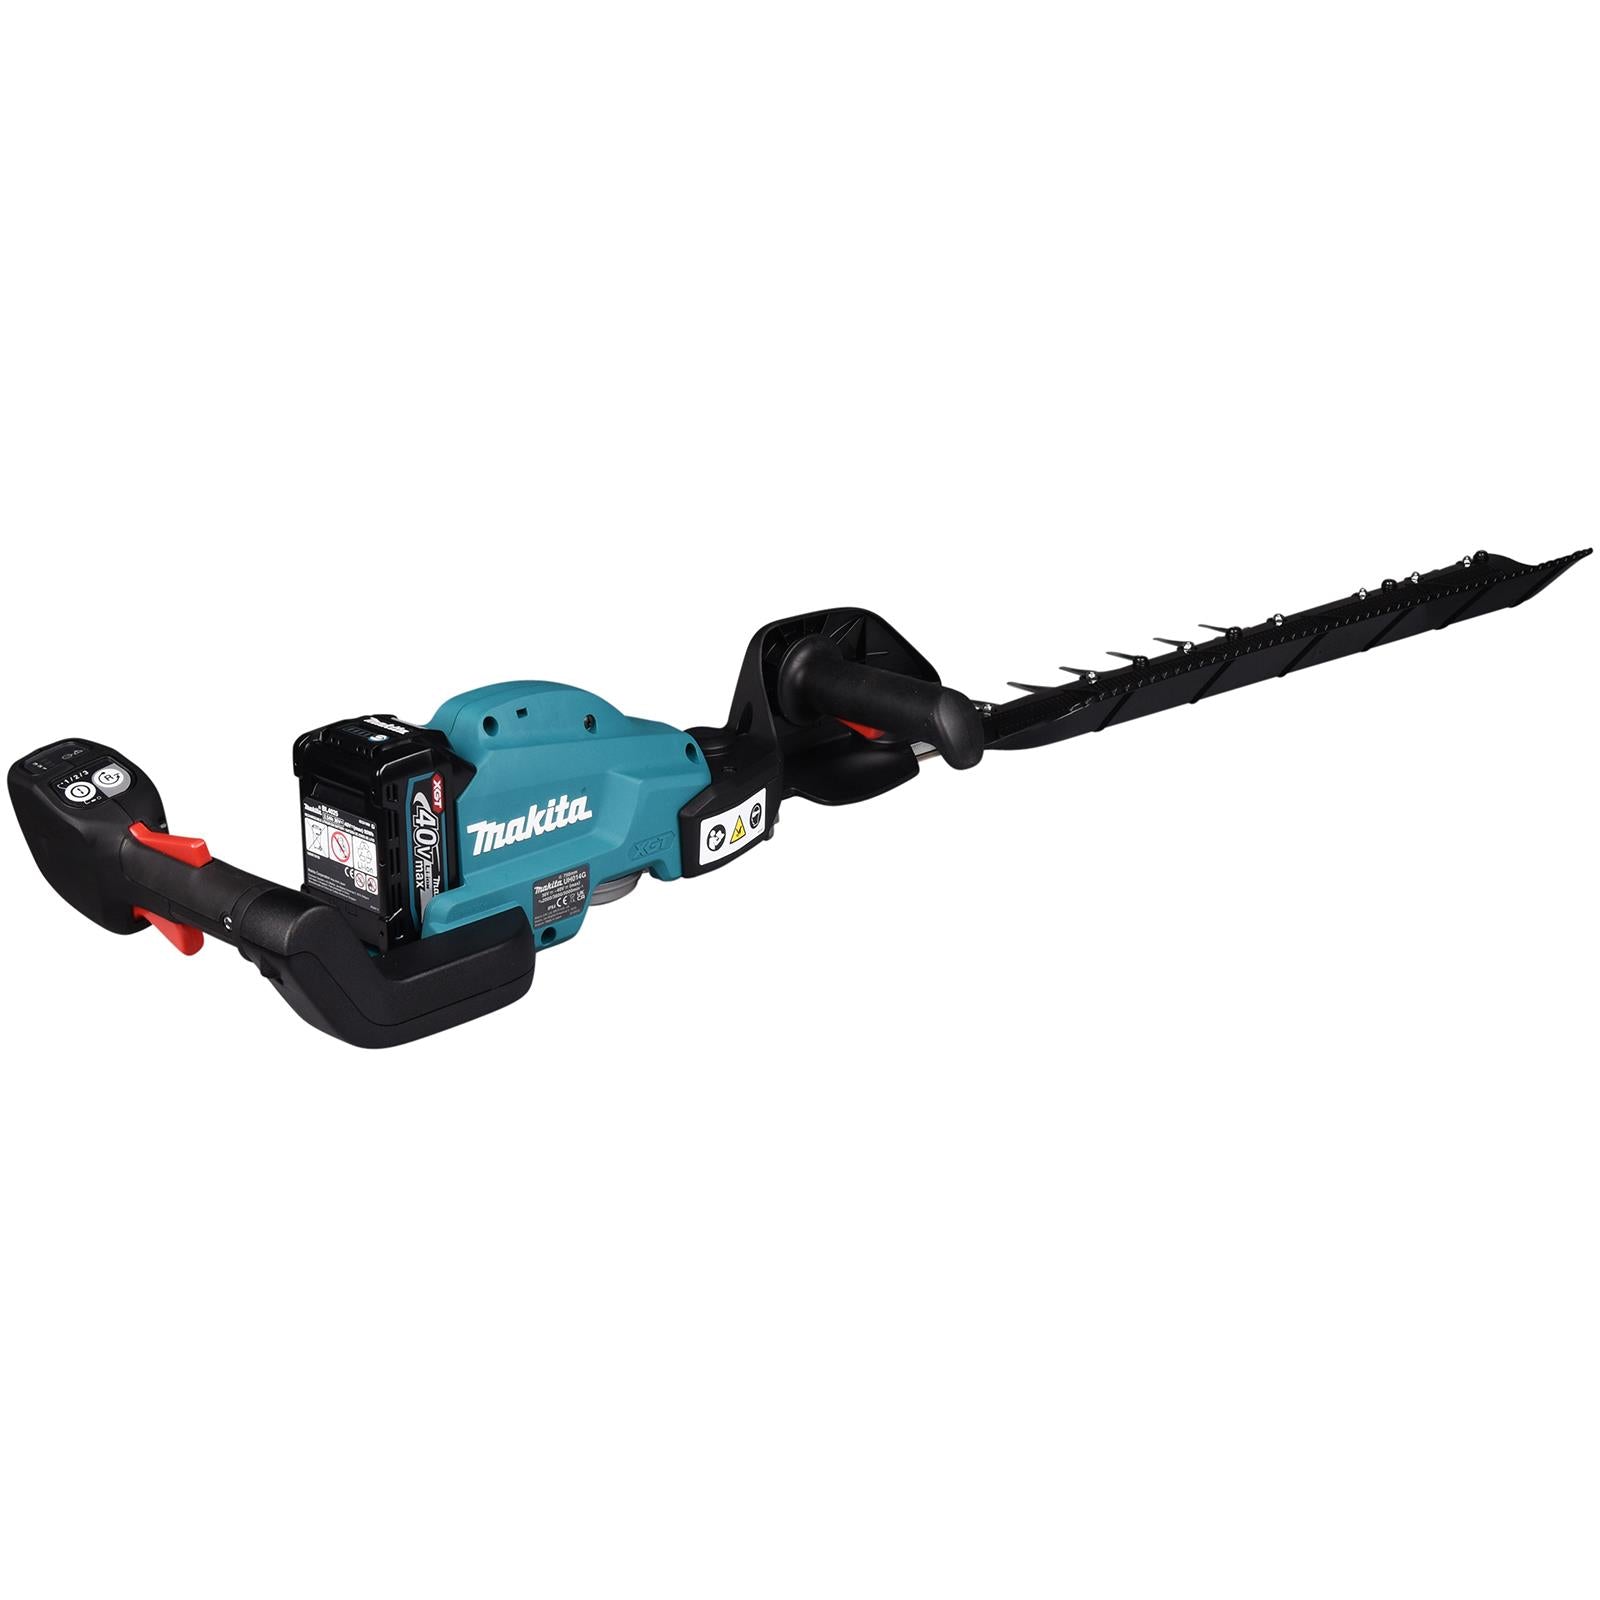 Makita Hedge Trimmer Kit 75cm 40V XGT Li-ion Brushless Cordless 2 x 2.5Ah Battery and Rapid Charger Garden Bush Cutter Cutting UH014GD202